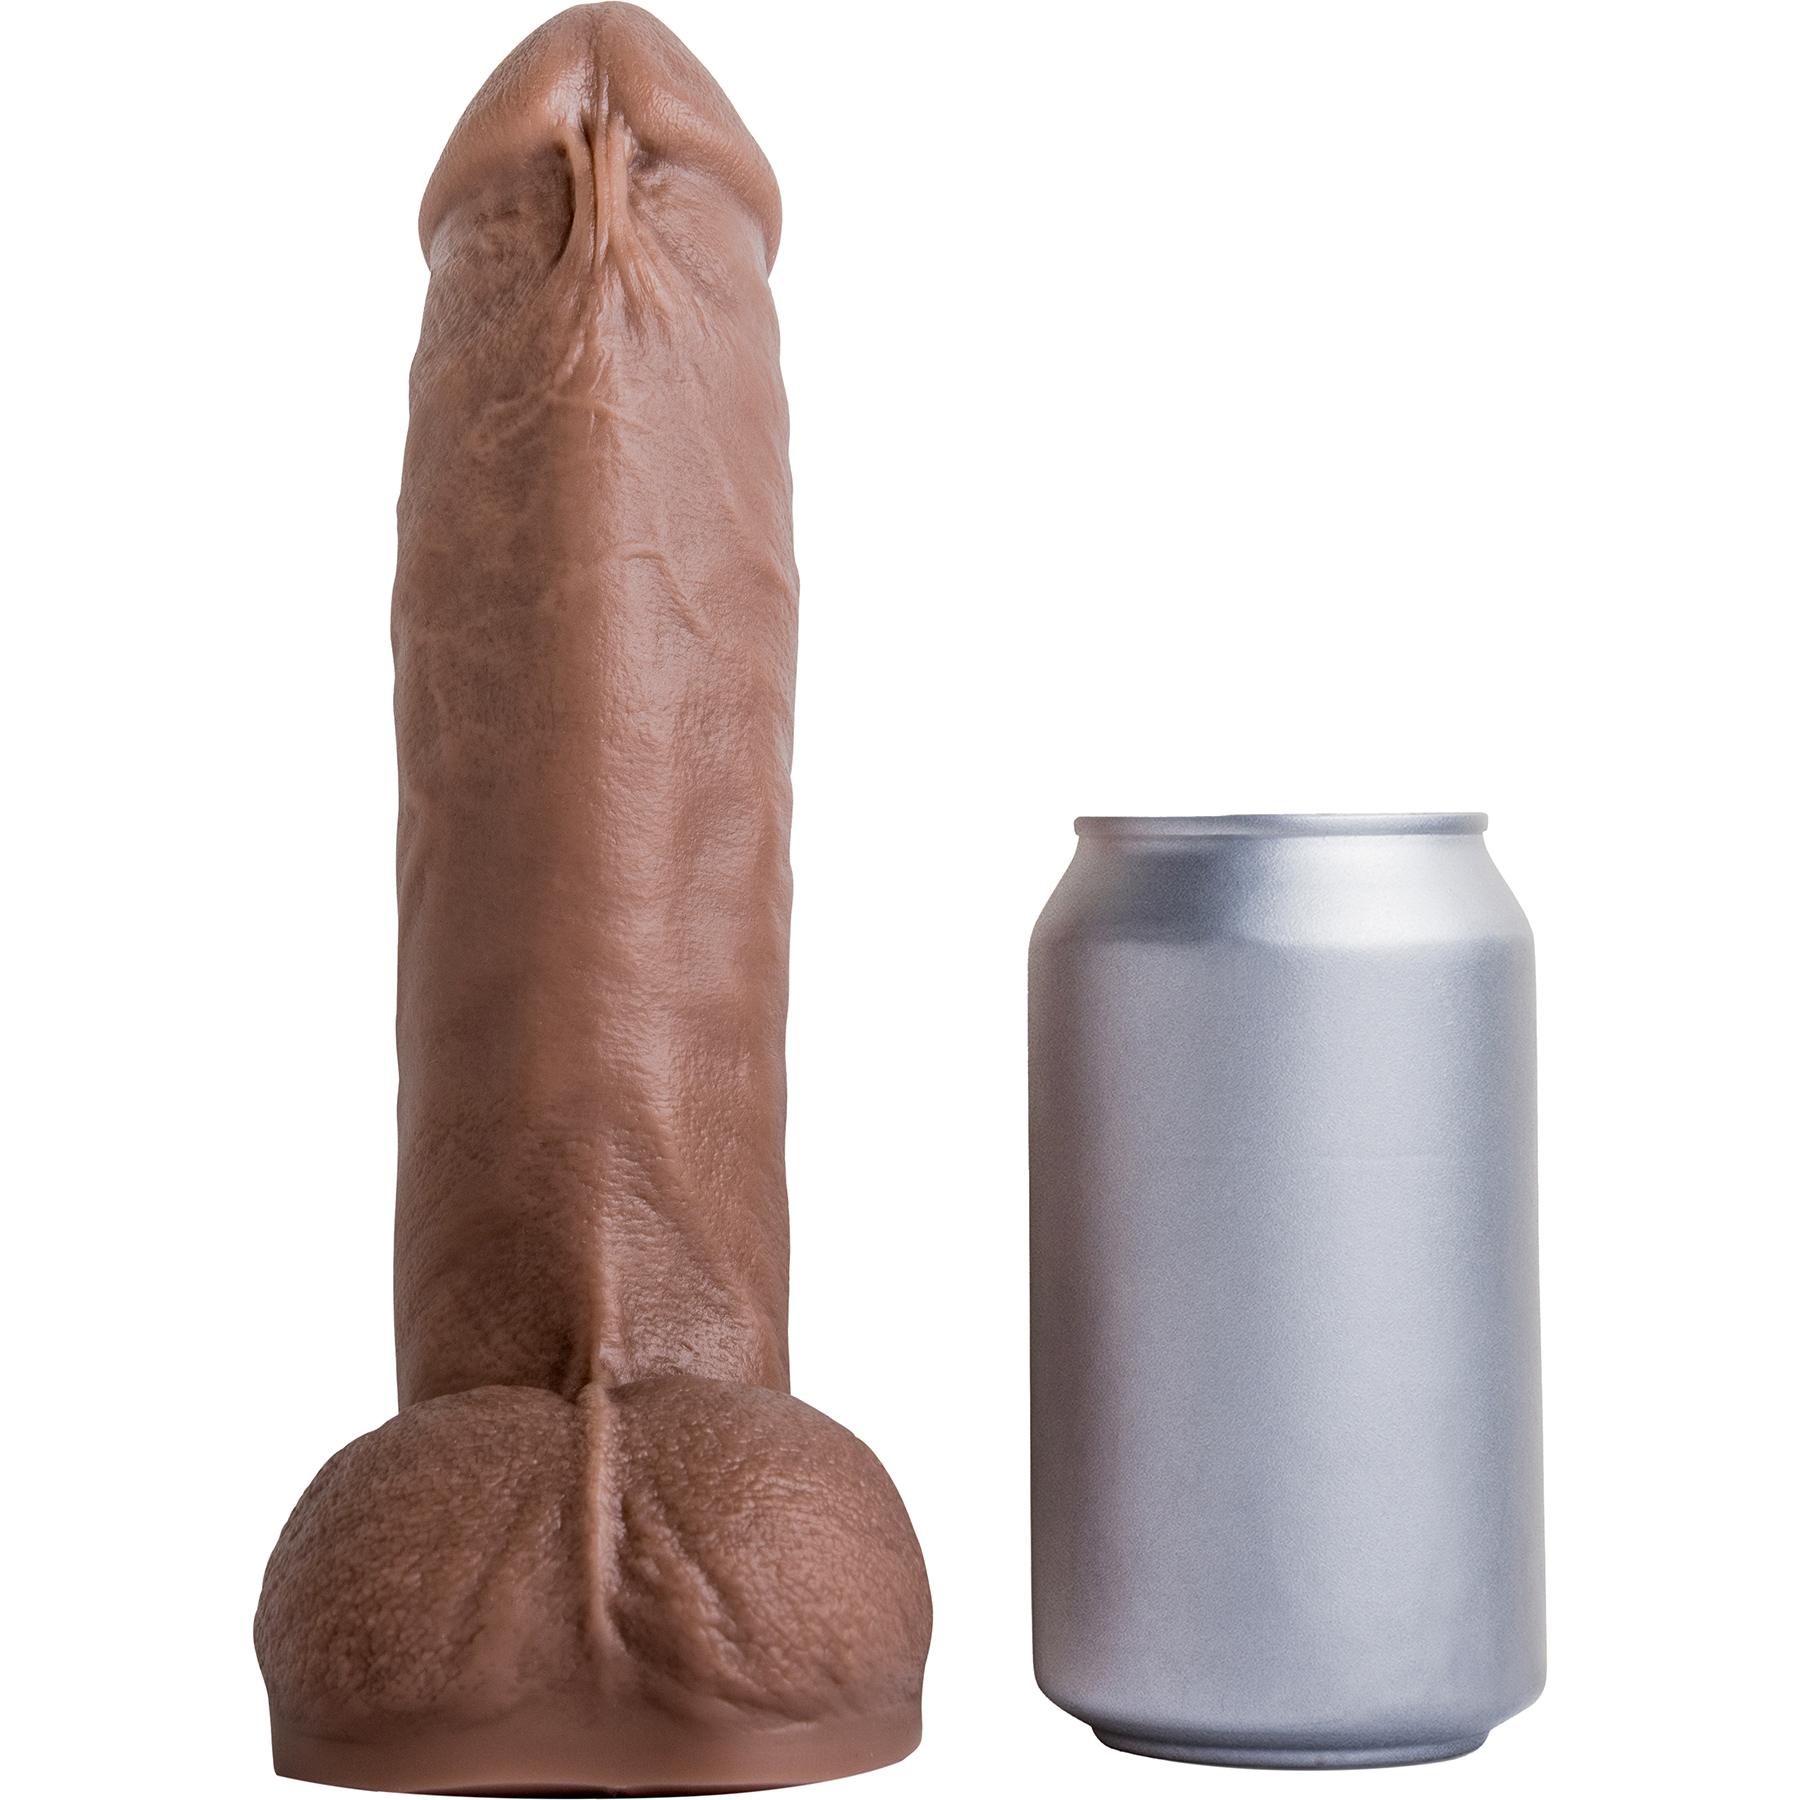 Hankey's Toys Rentman Small 9.5 Inch Silicone Cock With Balls